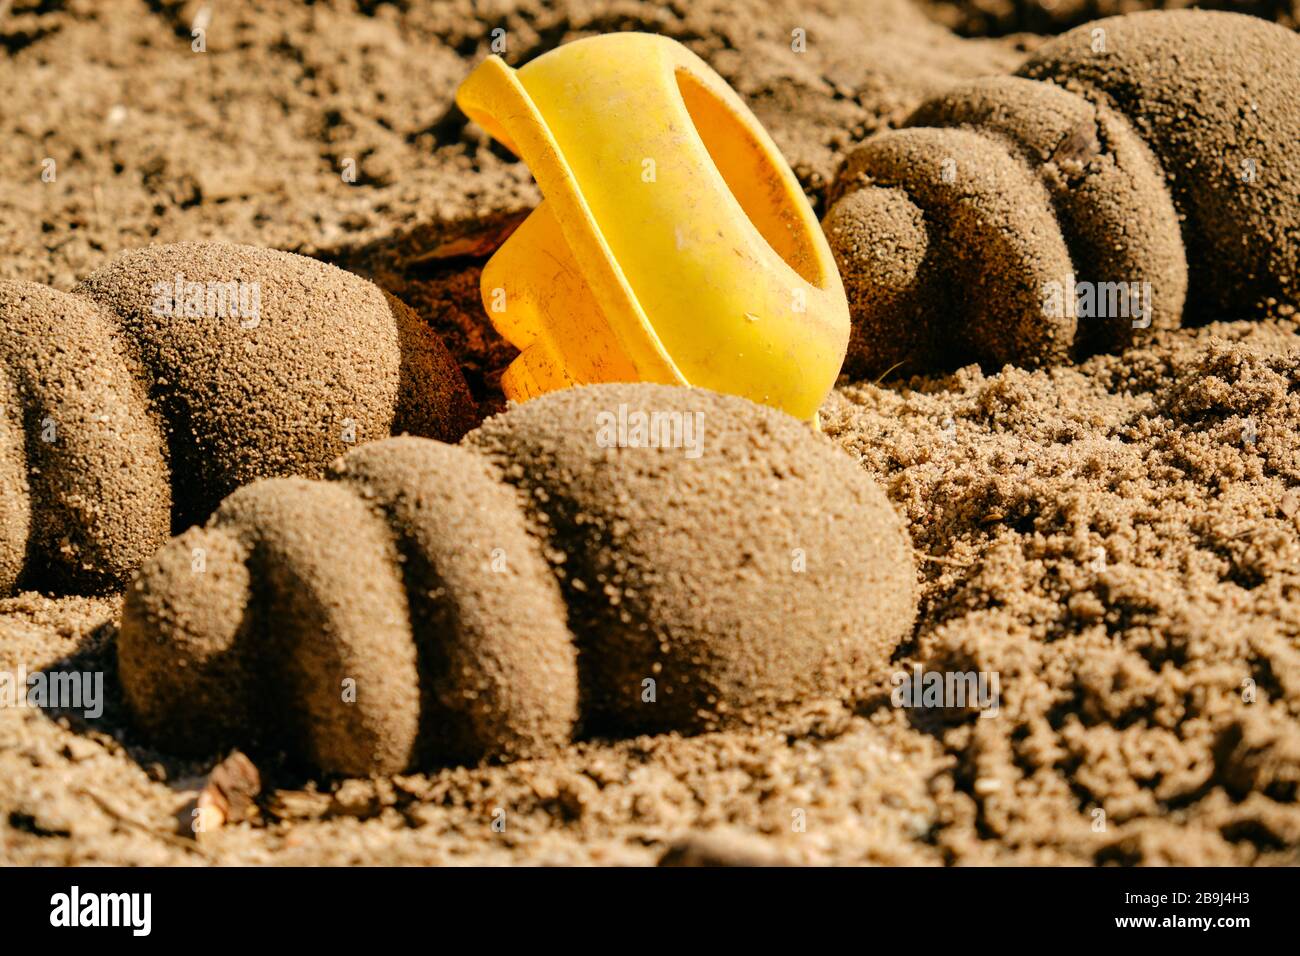 Used yellow toy boat lying upside down between sand shells on the sandy ground in the sun. Seen in Germany in March. Stock Photo